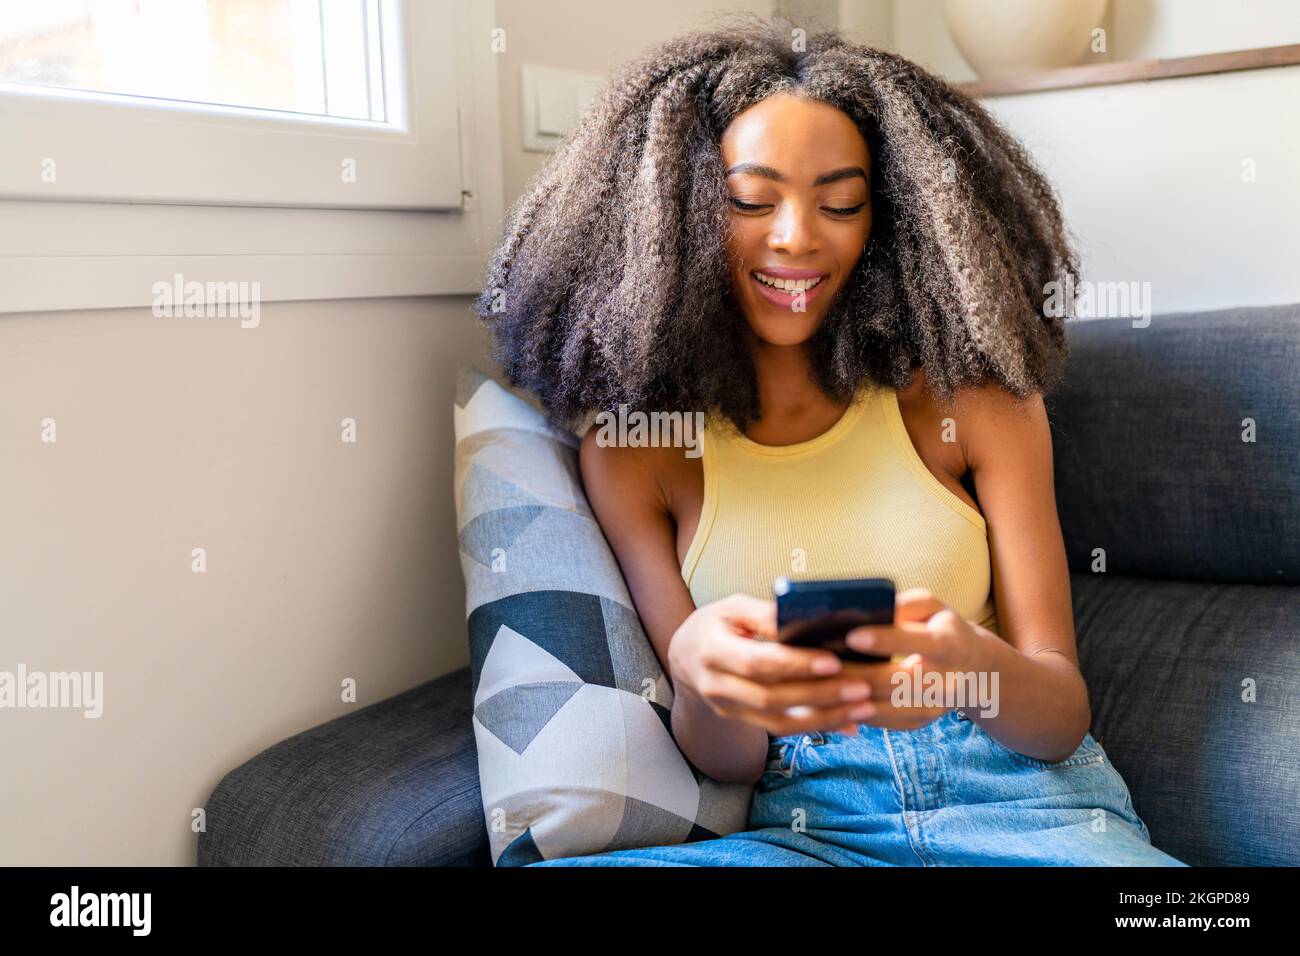 Woman with Afro hairstyle using mobile phone at home Stock Photo